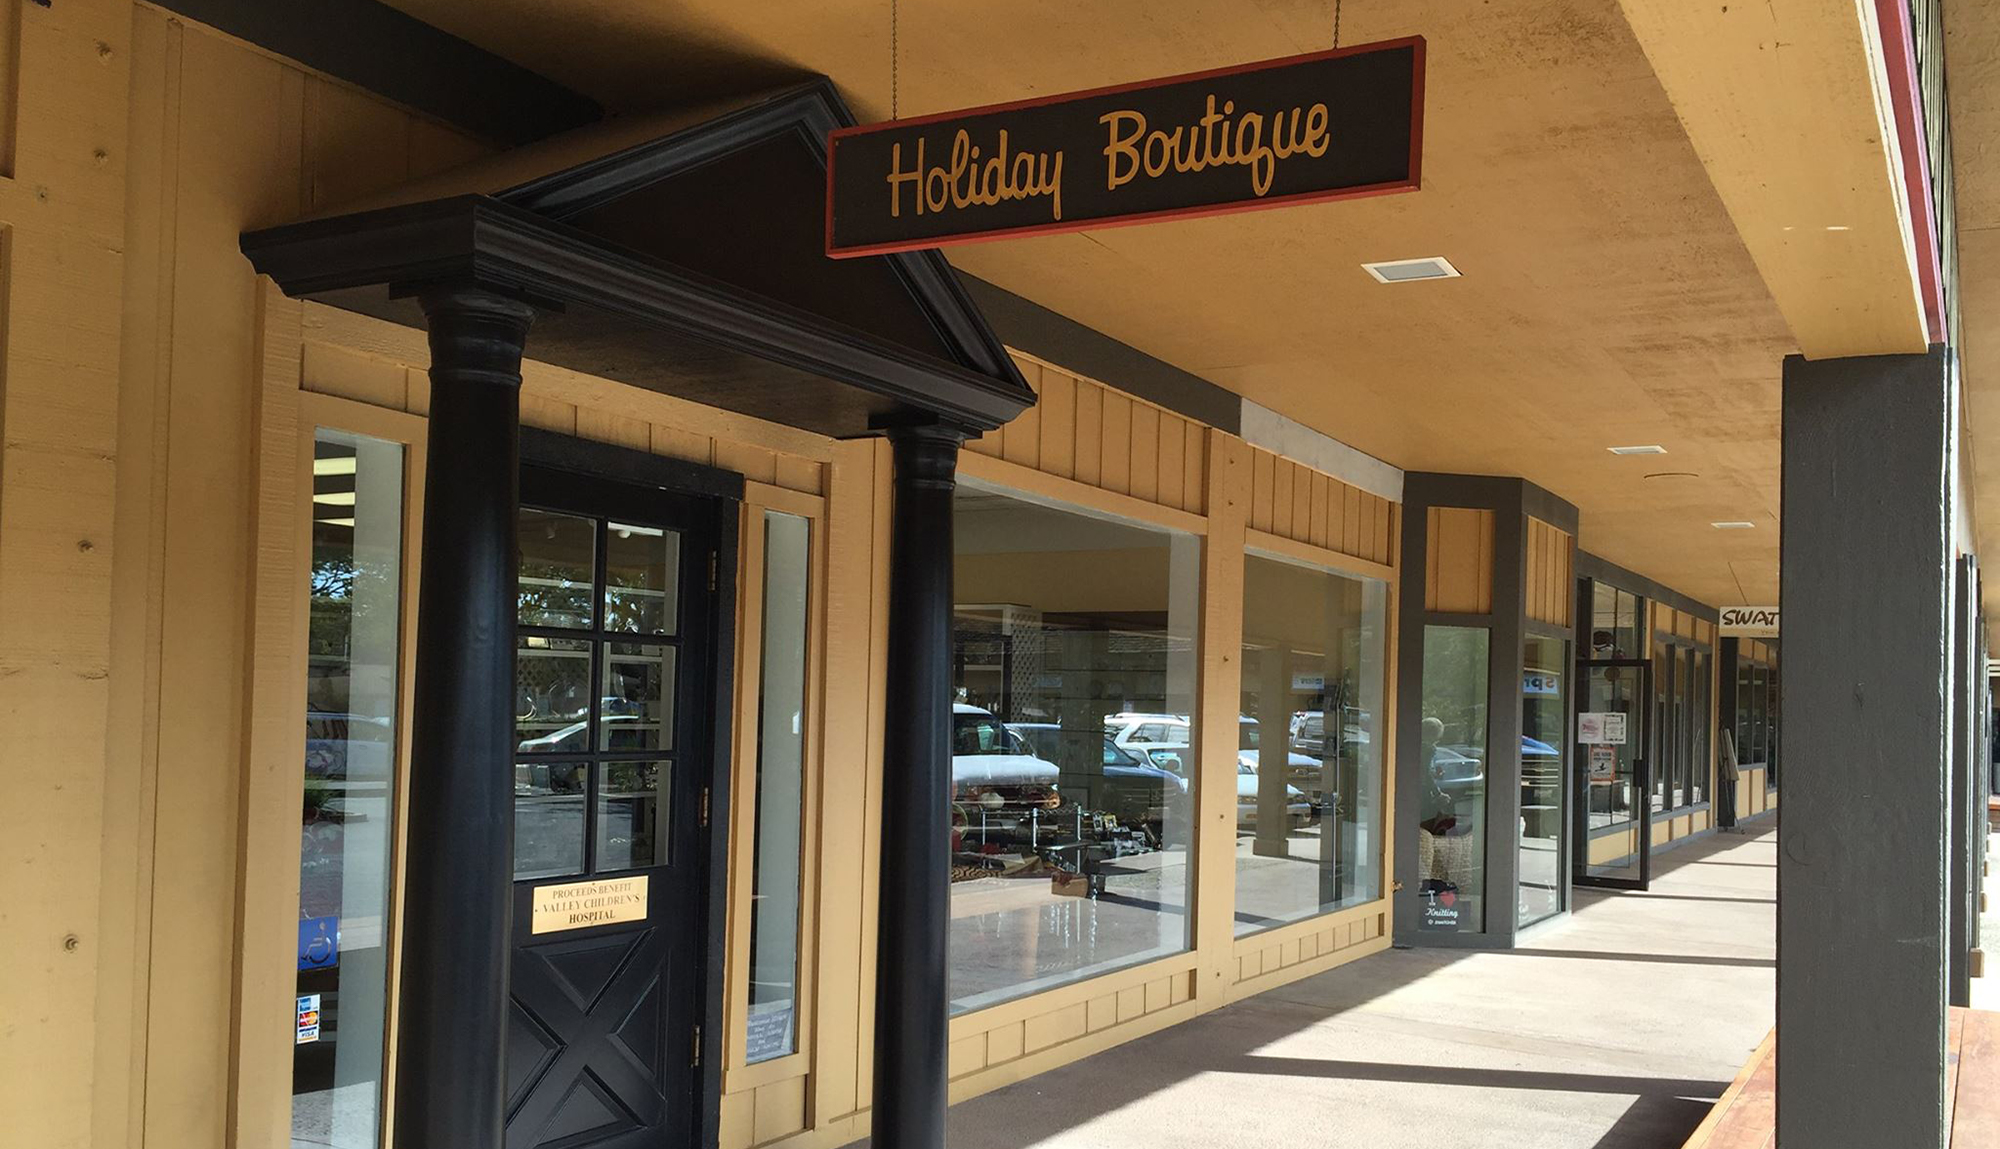 Photo of Holiday Boutique Storefront